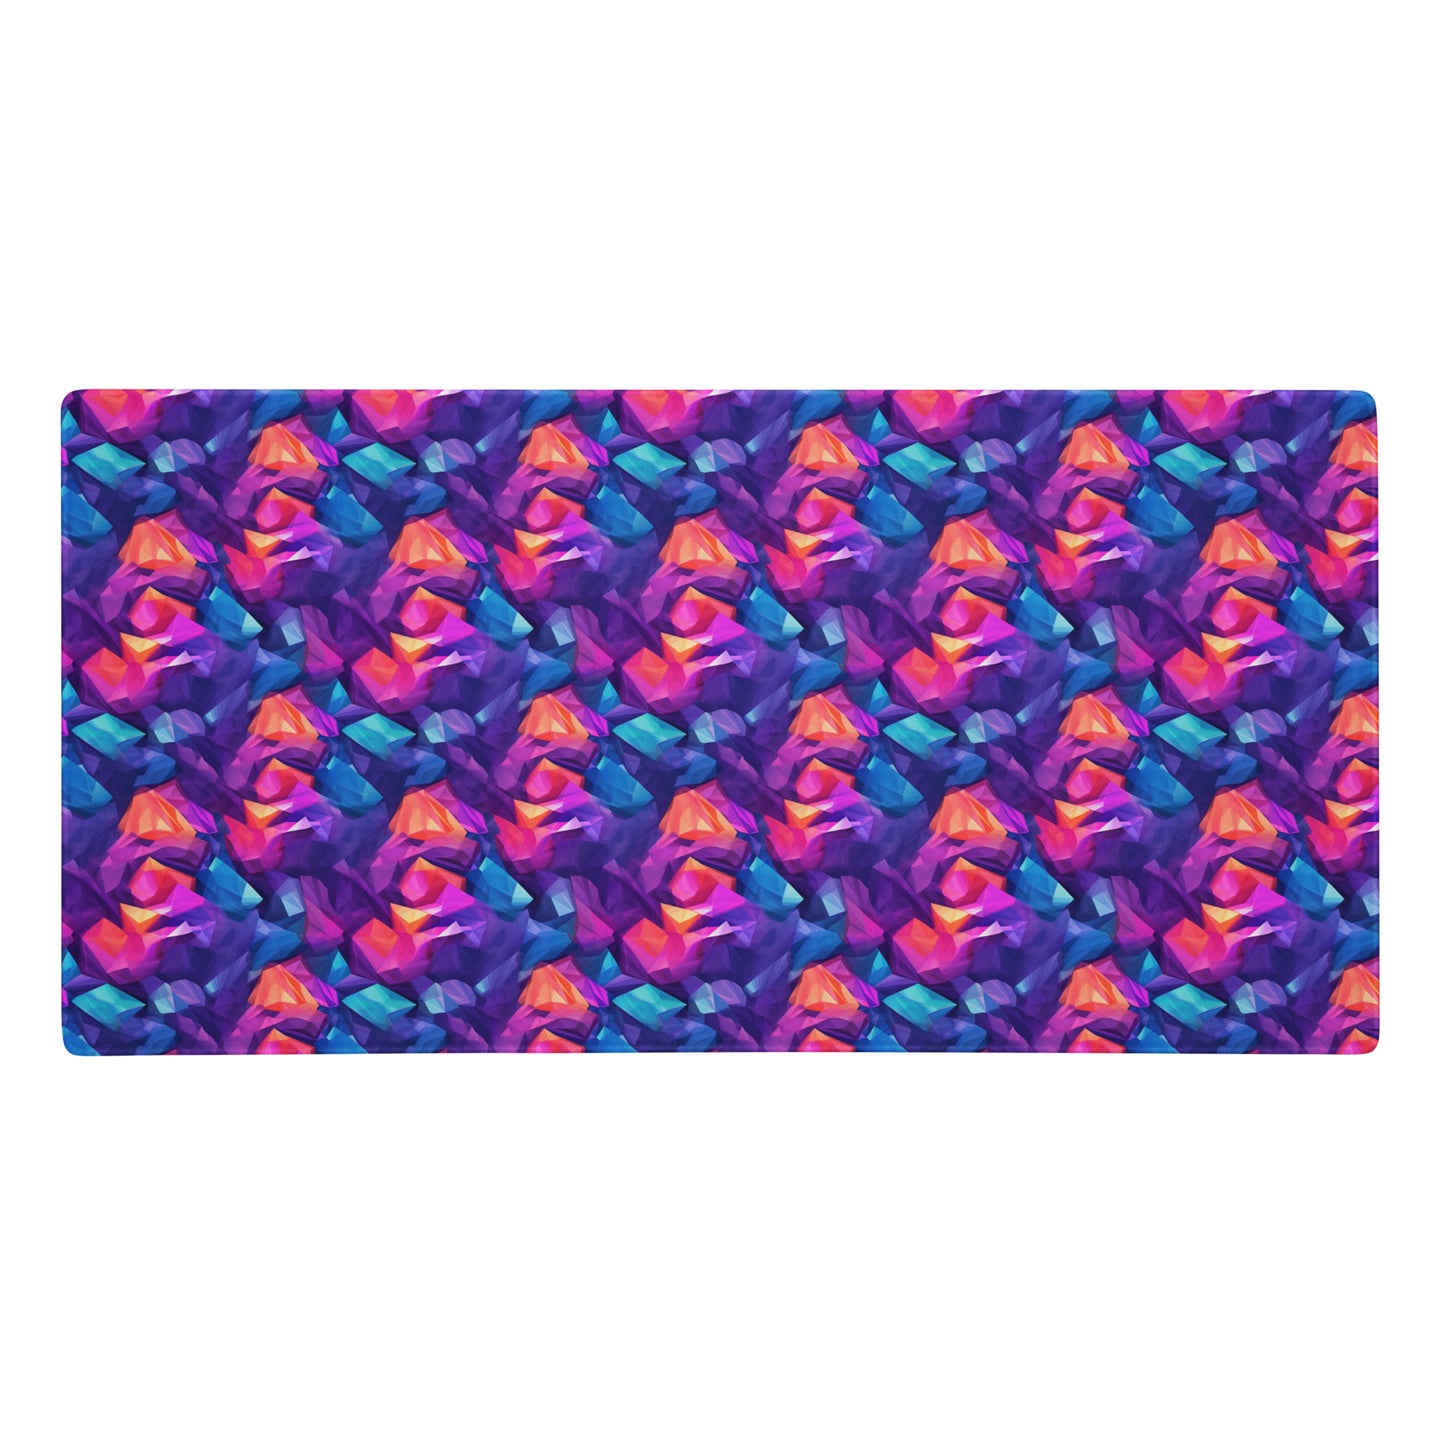 A 36" x 18" gaming desk pad with blue, purple, and orange crystals.